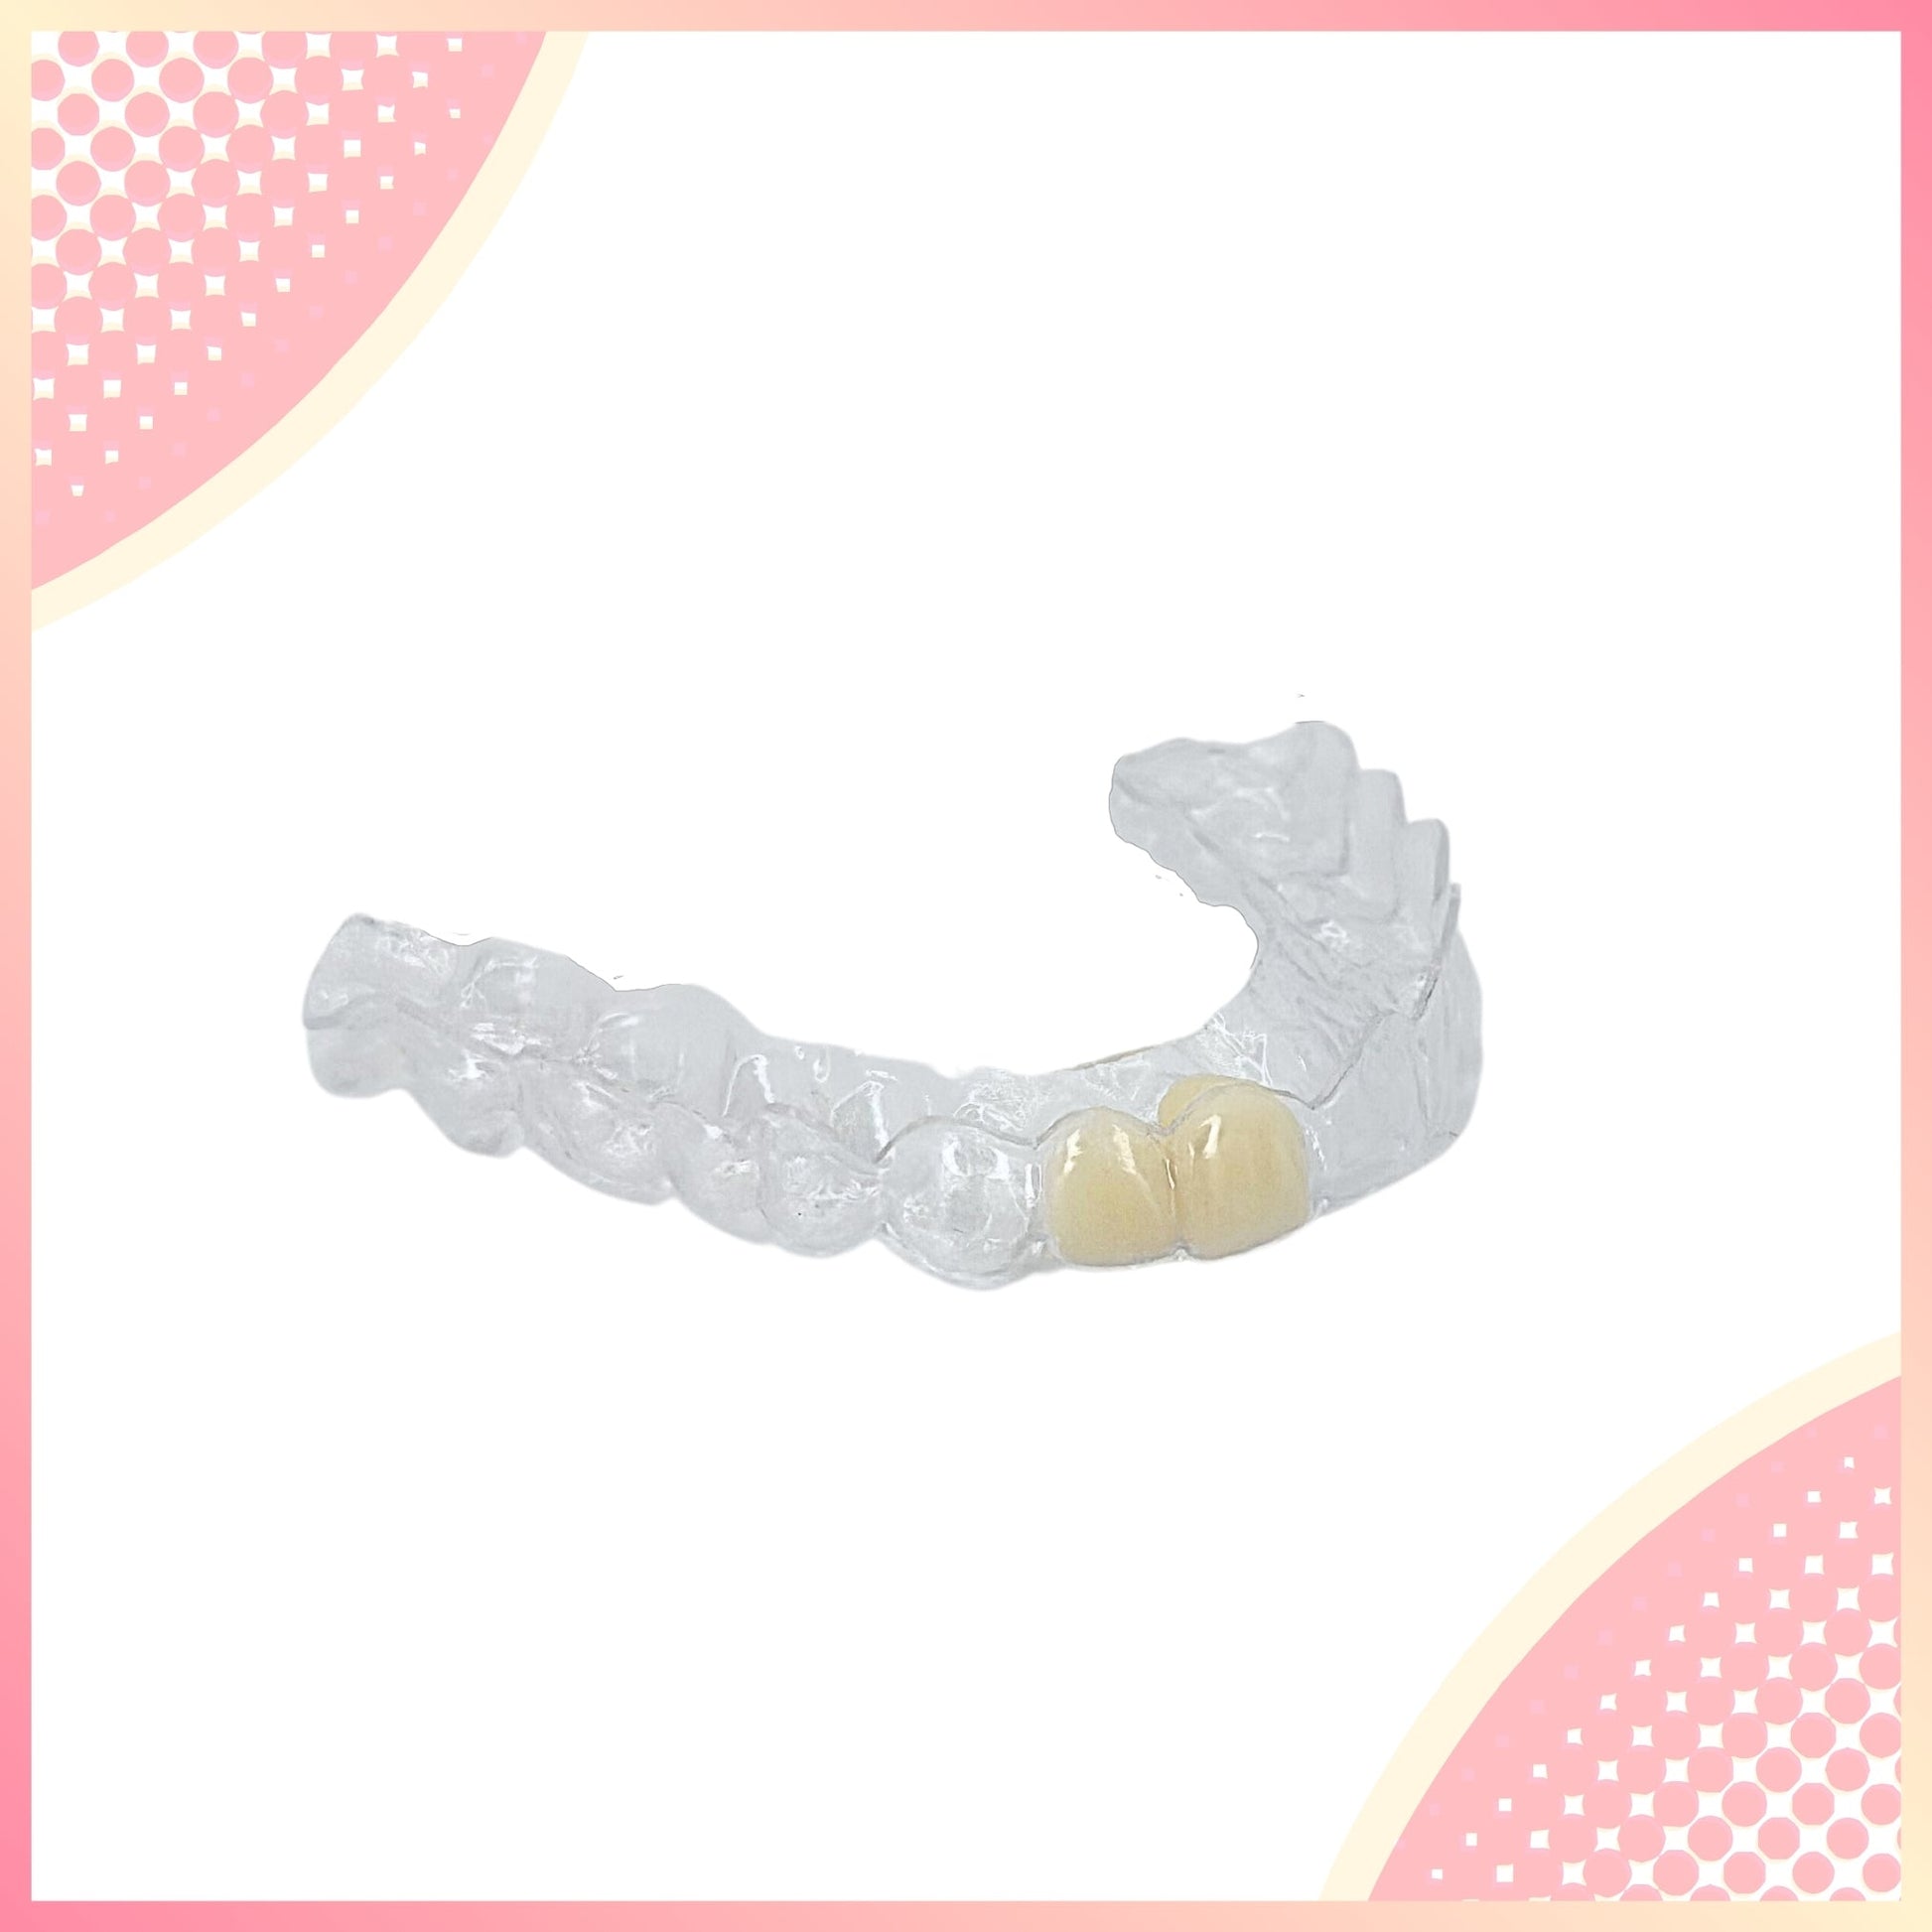 A clear Essix dental appliance, designed to fit snugly over the teeth, providing discreet alignment correction.